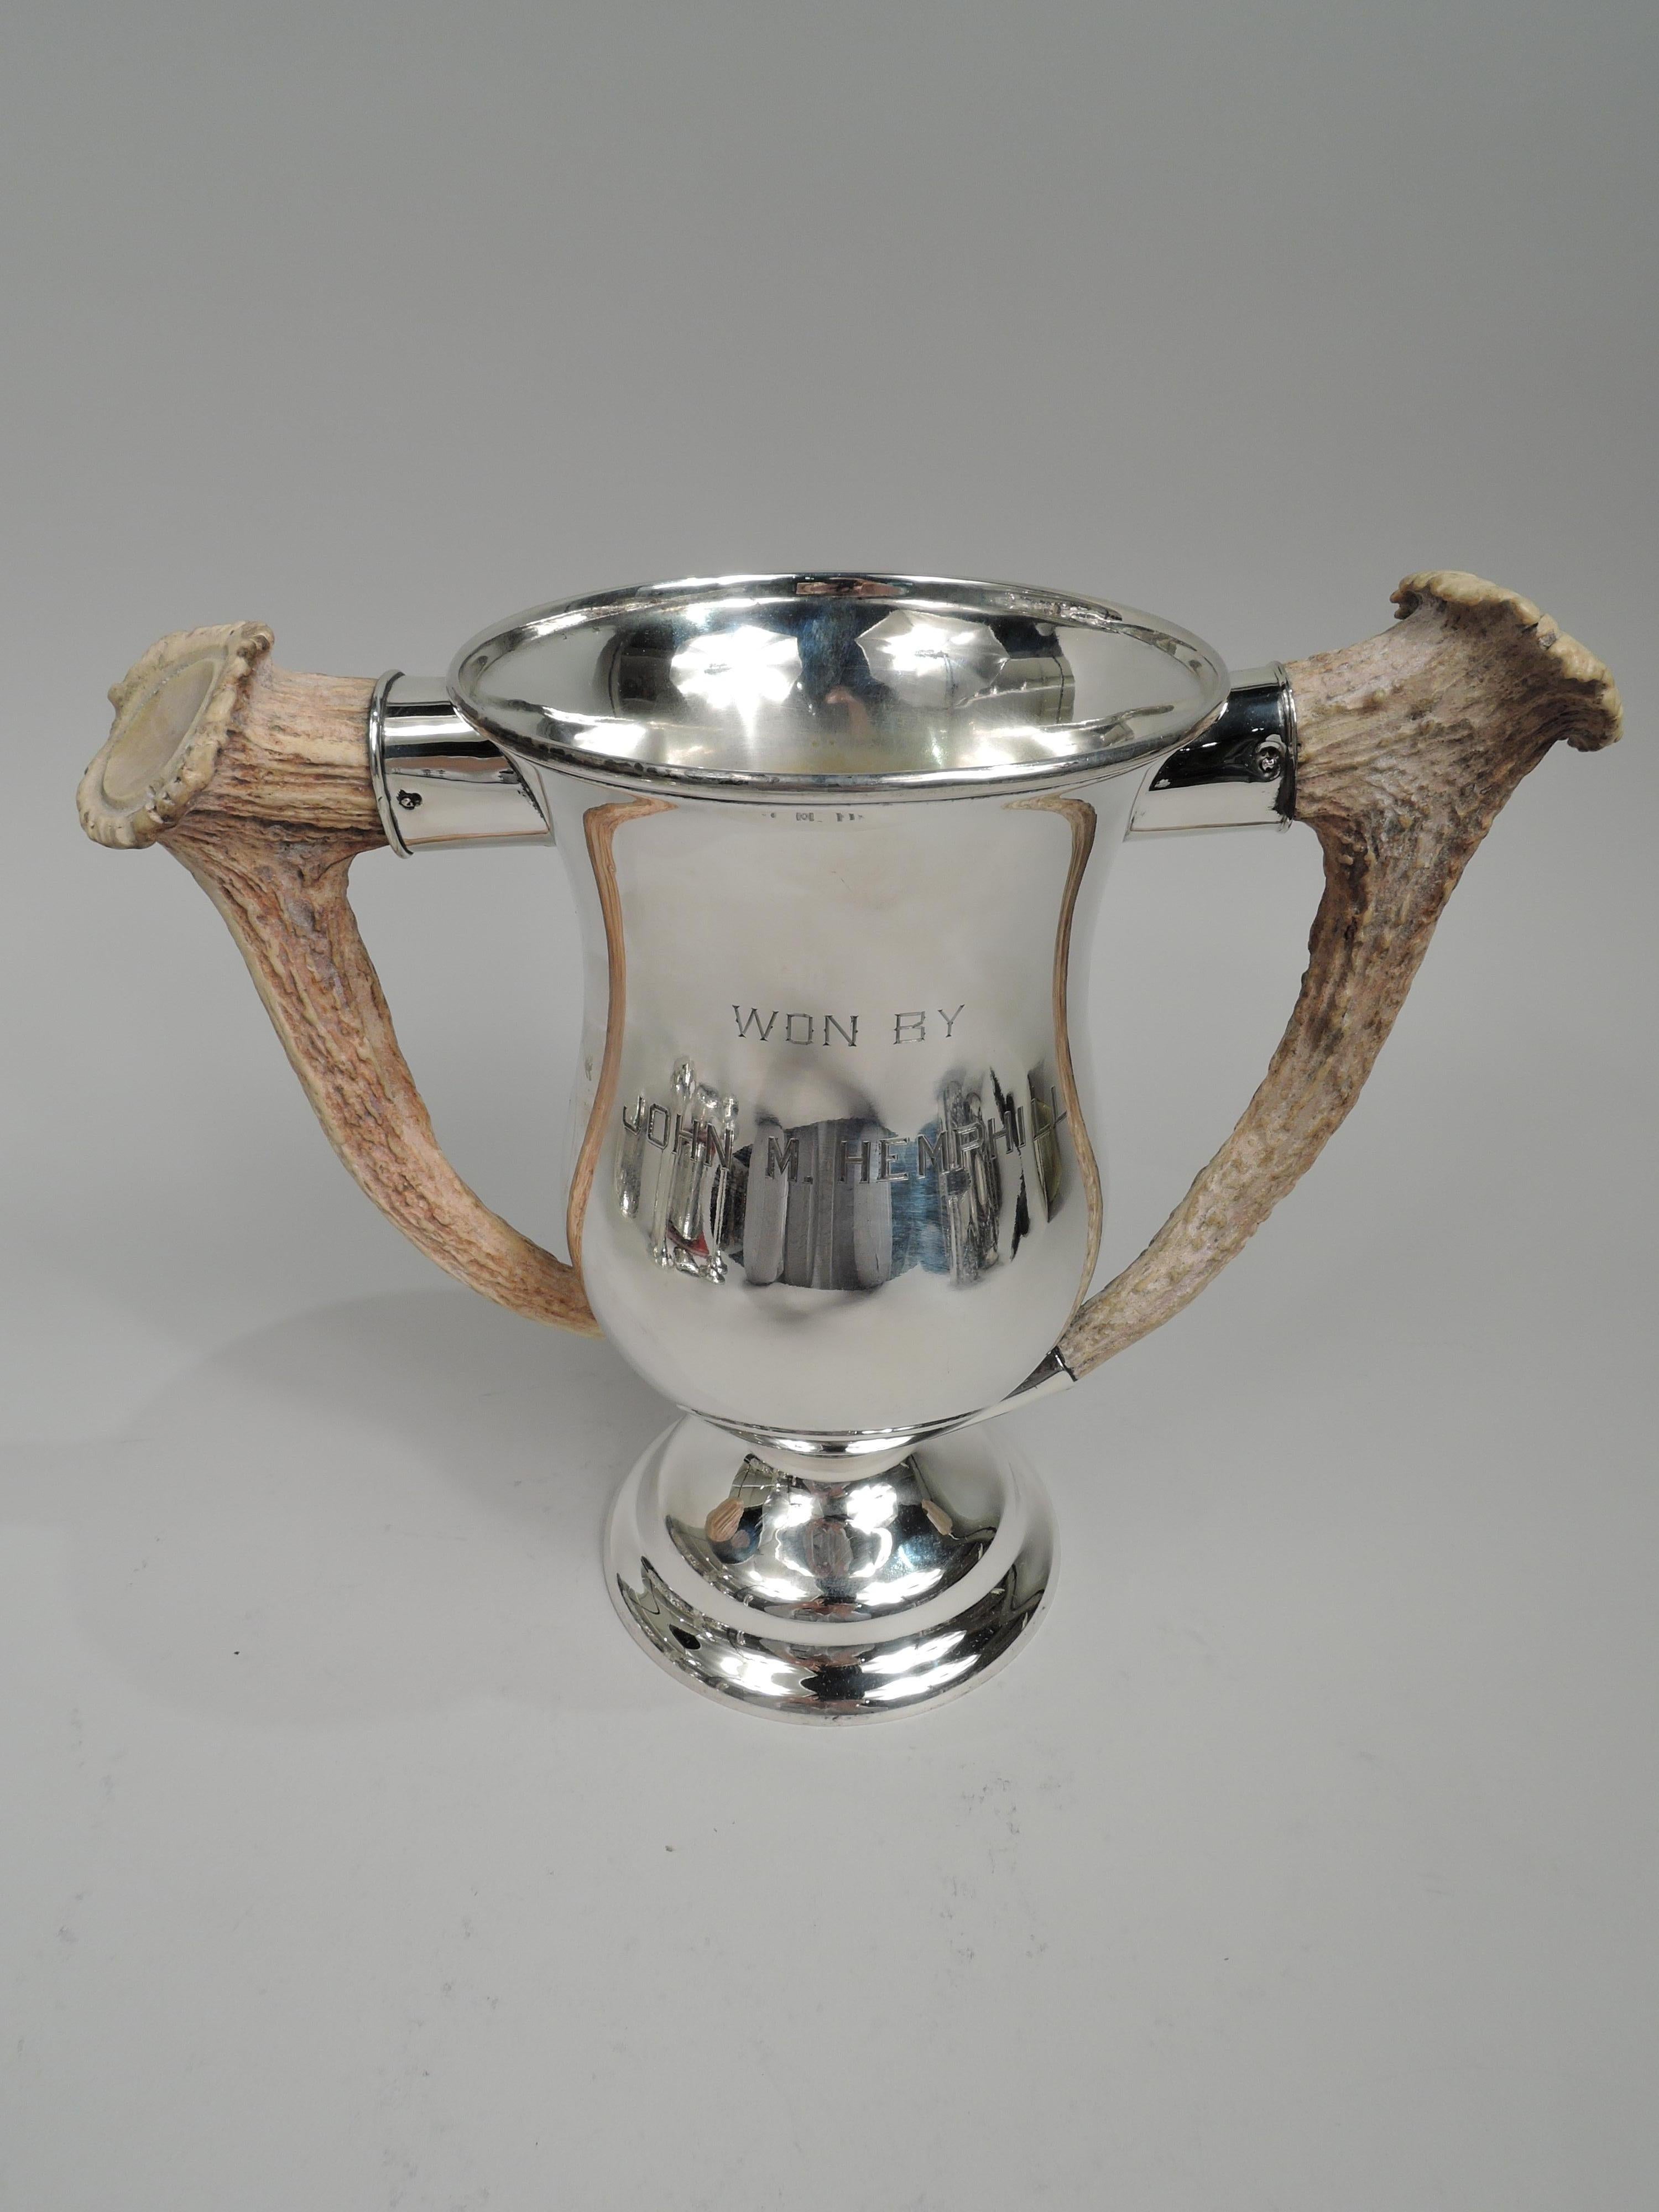 Edwardian sterling silver trophy cup, ca 1910. Baluster bowl with silver-mounted horn side handles; domed foot and gilt-washed interior. On front is engraved presentation: “James C. Brooks / Memorial Cup / Ideal Score for Men May 1st To Oct. 1st